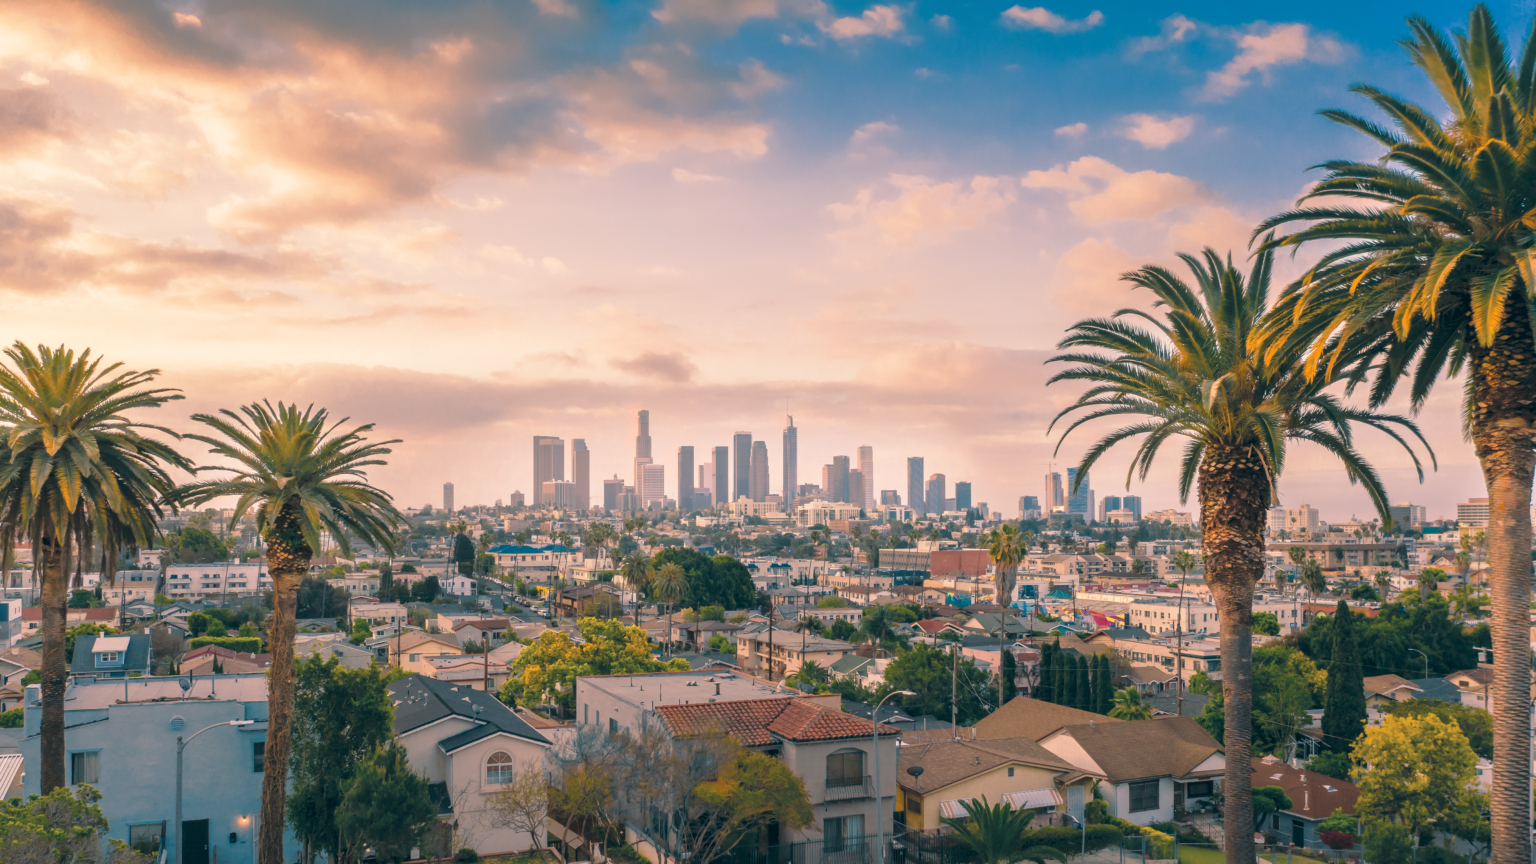 Beautiful,Sunset,Of,Los,Angeles,Downtown,Skyline,And,Palm,Trees